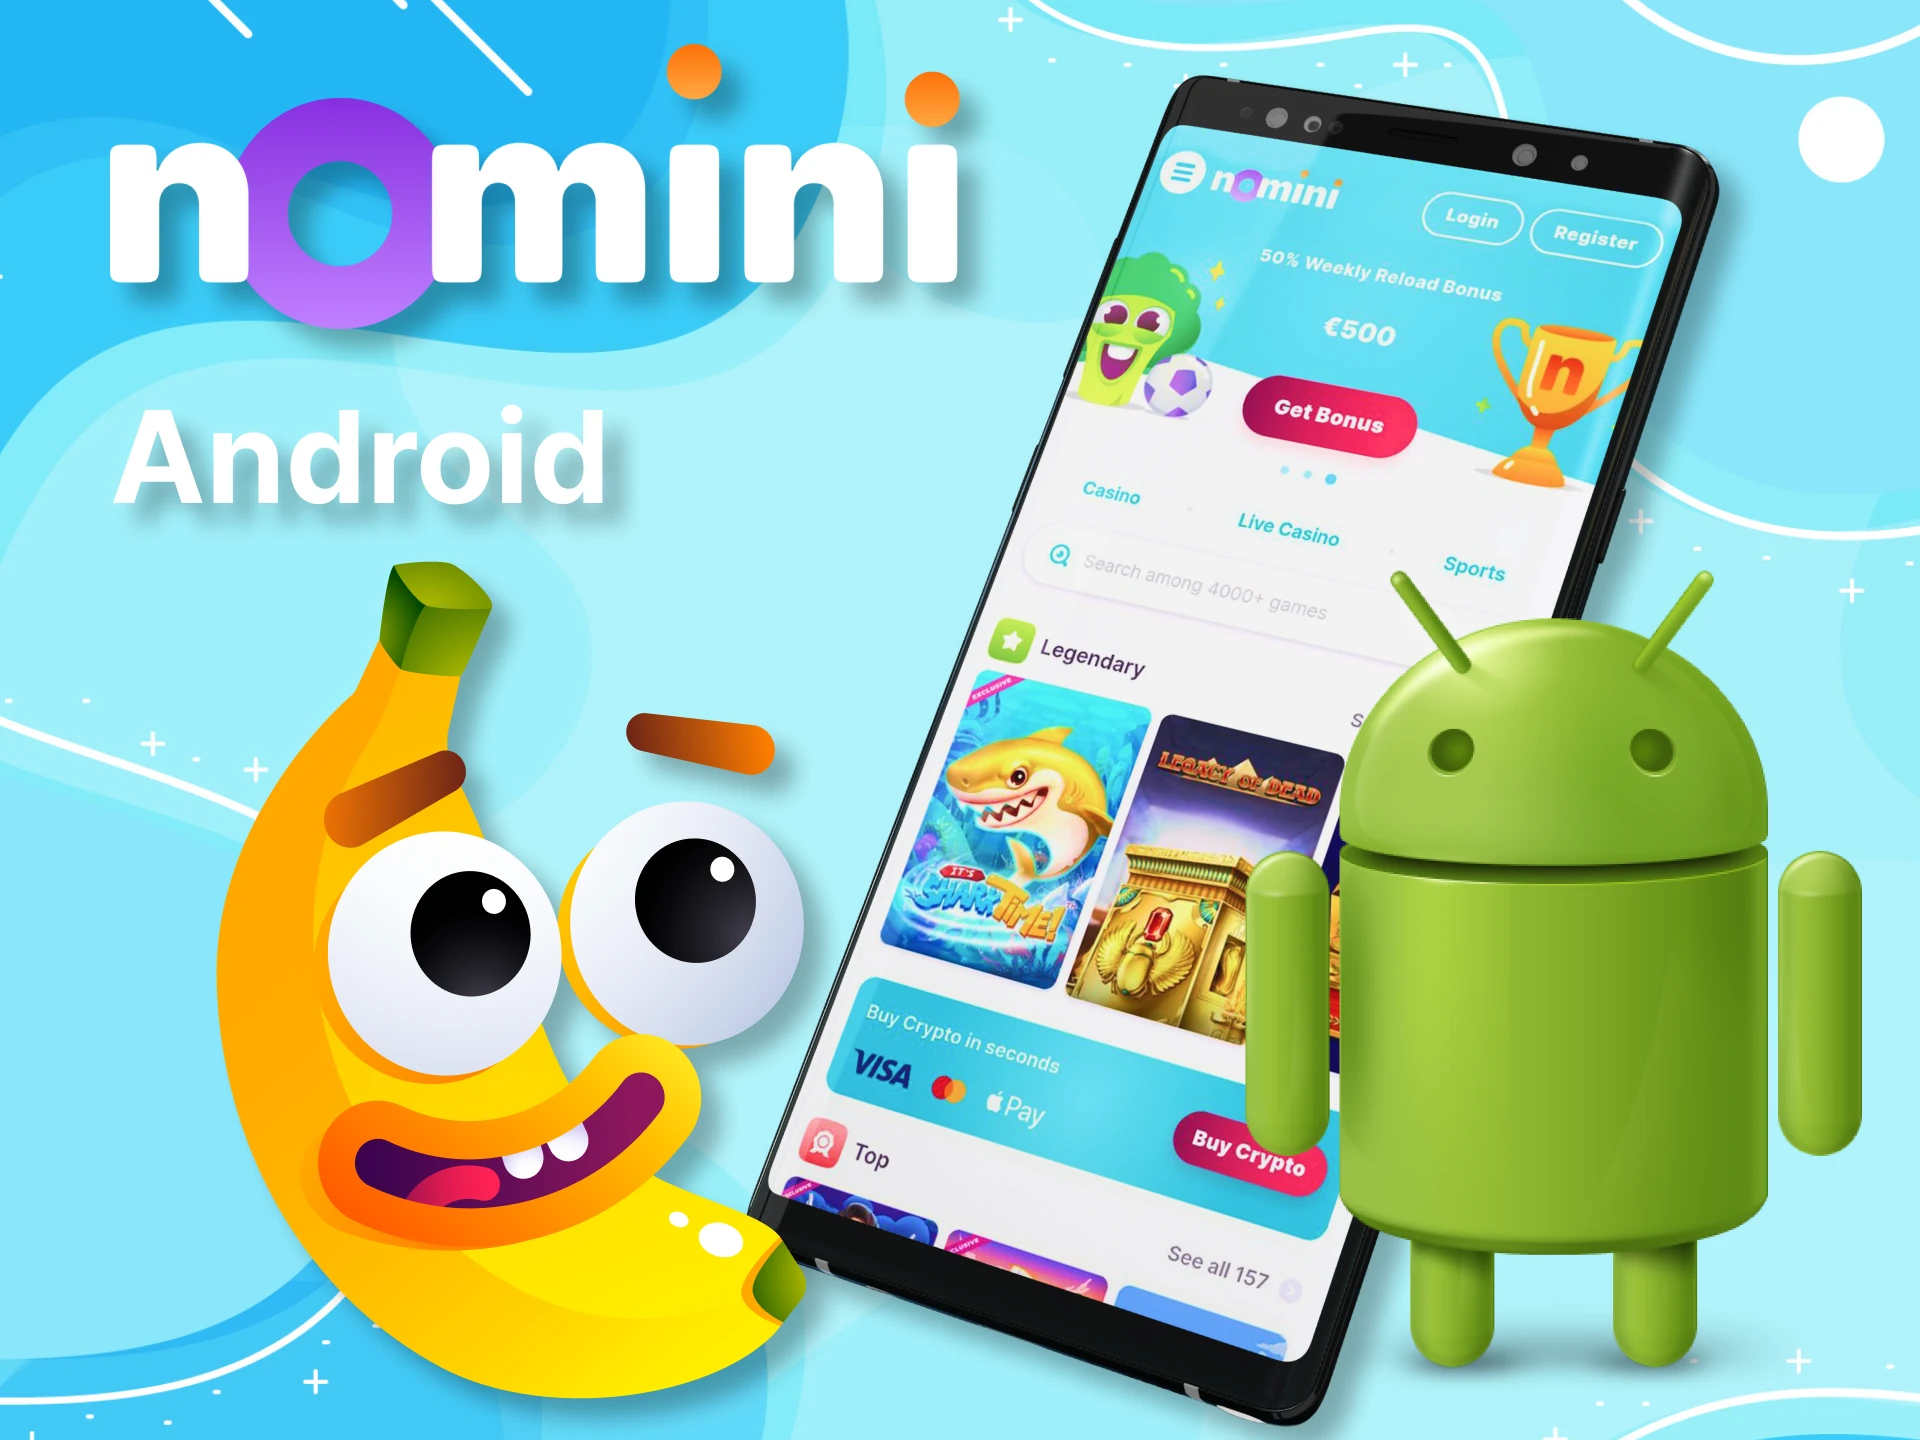 The Nomini app can be installed on your Android phone.